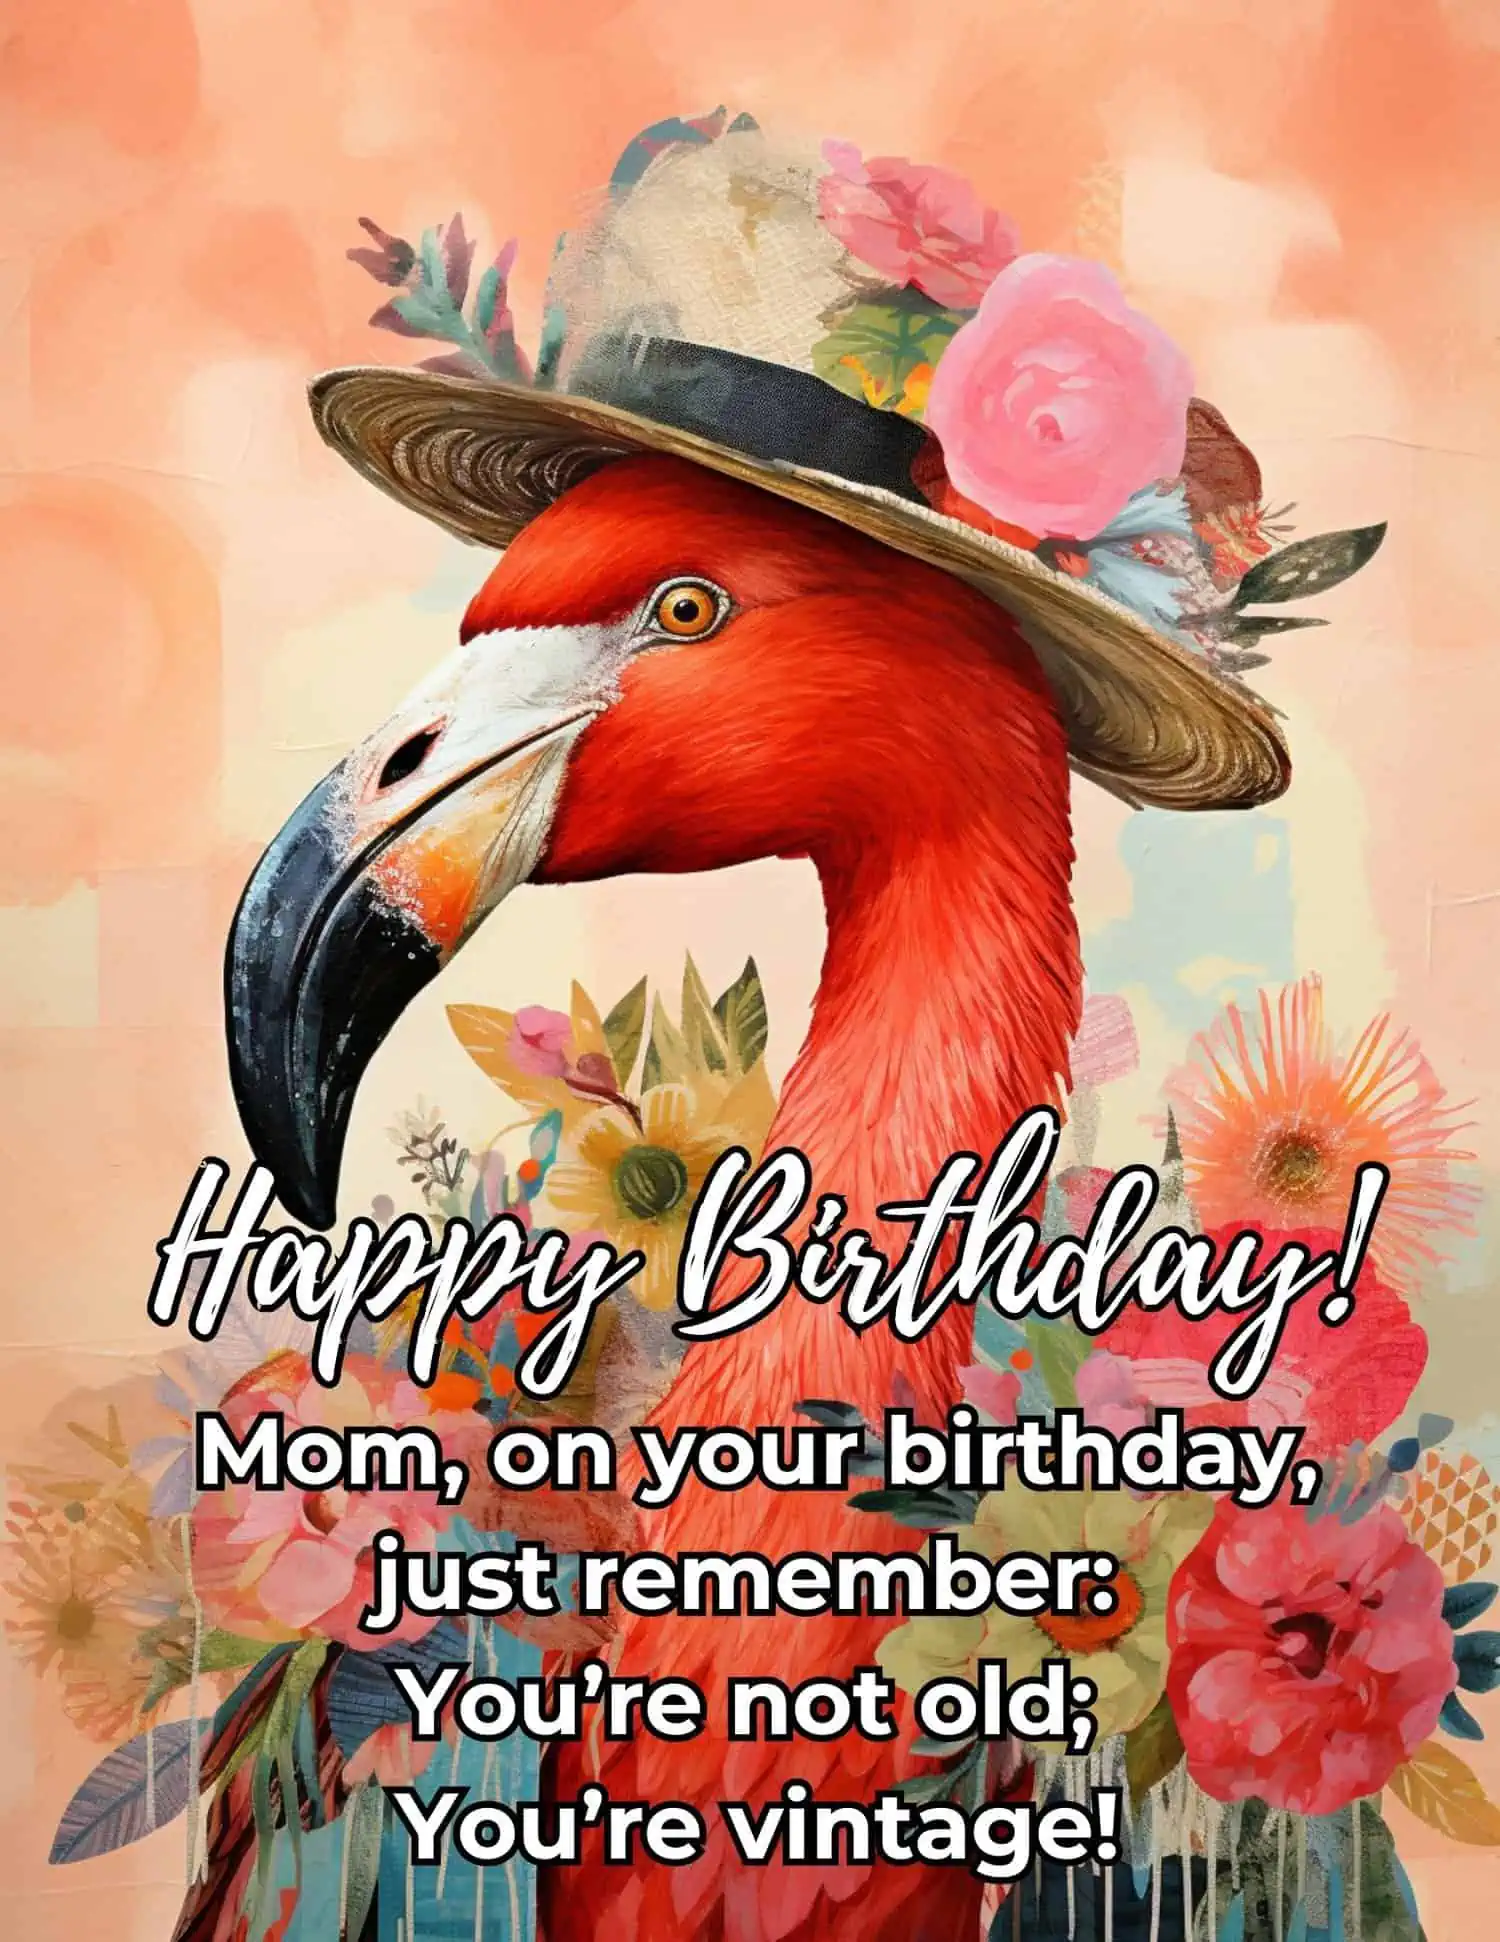 Humorous birthday messages crafted specially for our beloved mothers.